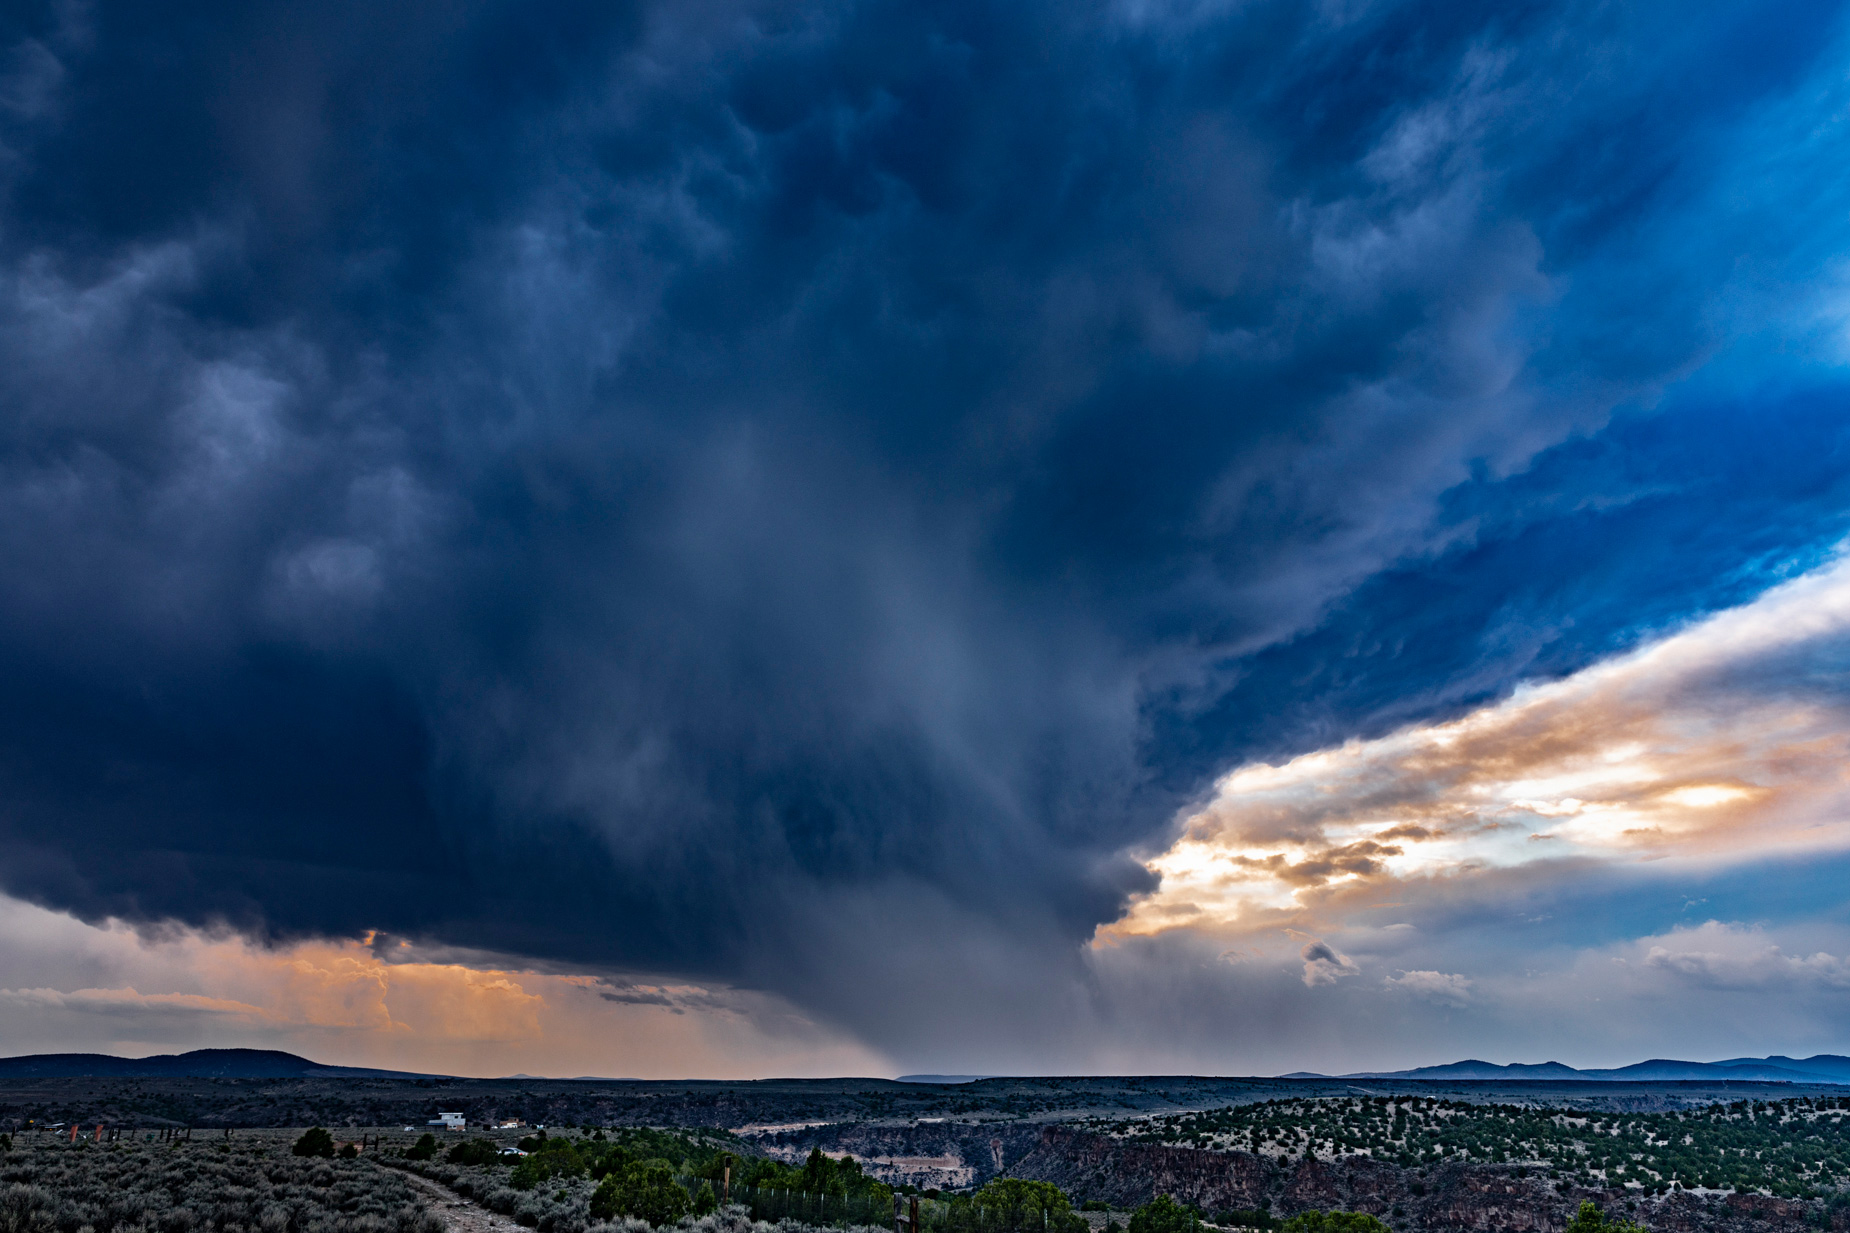 Dramatic weather in northern New Mexico